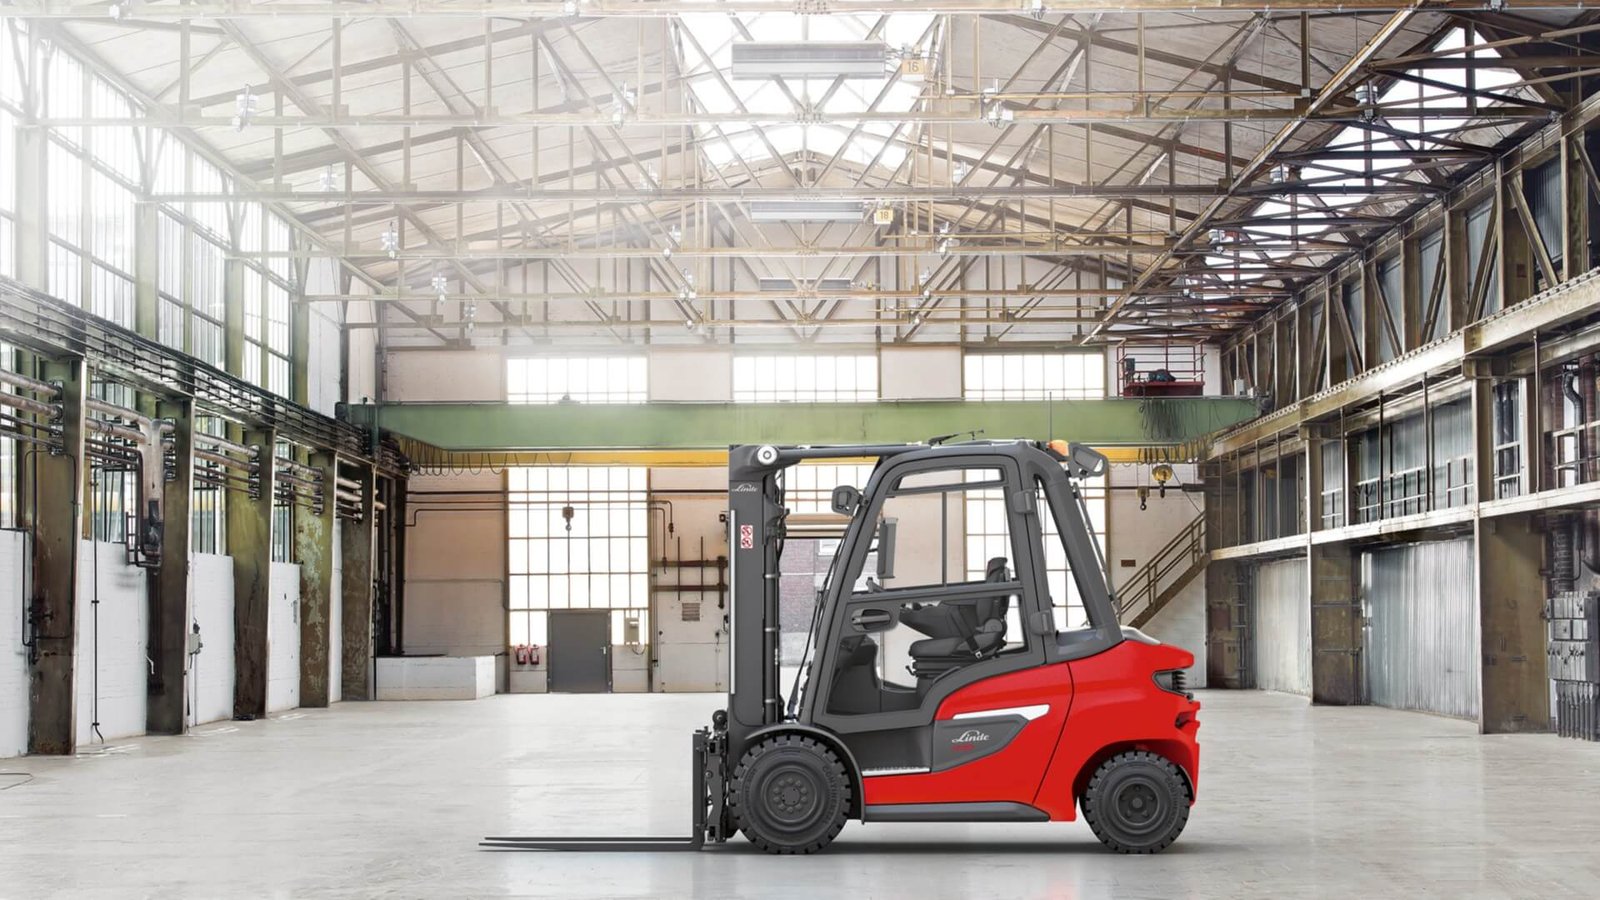 Forklift in Bangalore|Forklift dealers in bangalore|Forklift manufacturers in bangalore|Forklift truck in bangalore|Godrej forklift in bangalore|Godrej forklift in Karnataka|Toyota forklift in bangalore|Voltas forklift in bangalore|Ace forklift in bangalore|Walk behind roller in bangalore|Electric stacker in bangalore